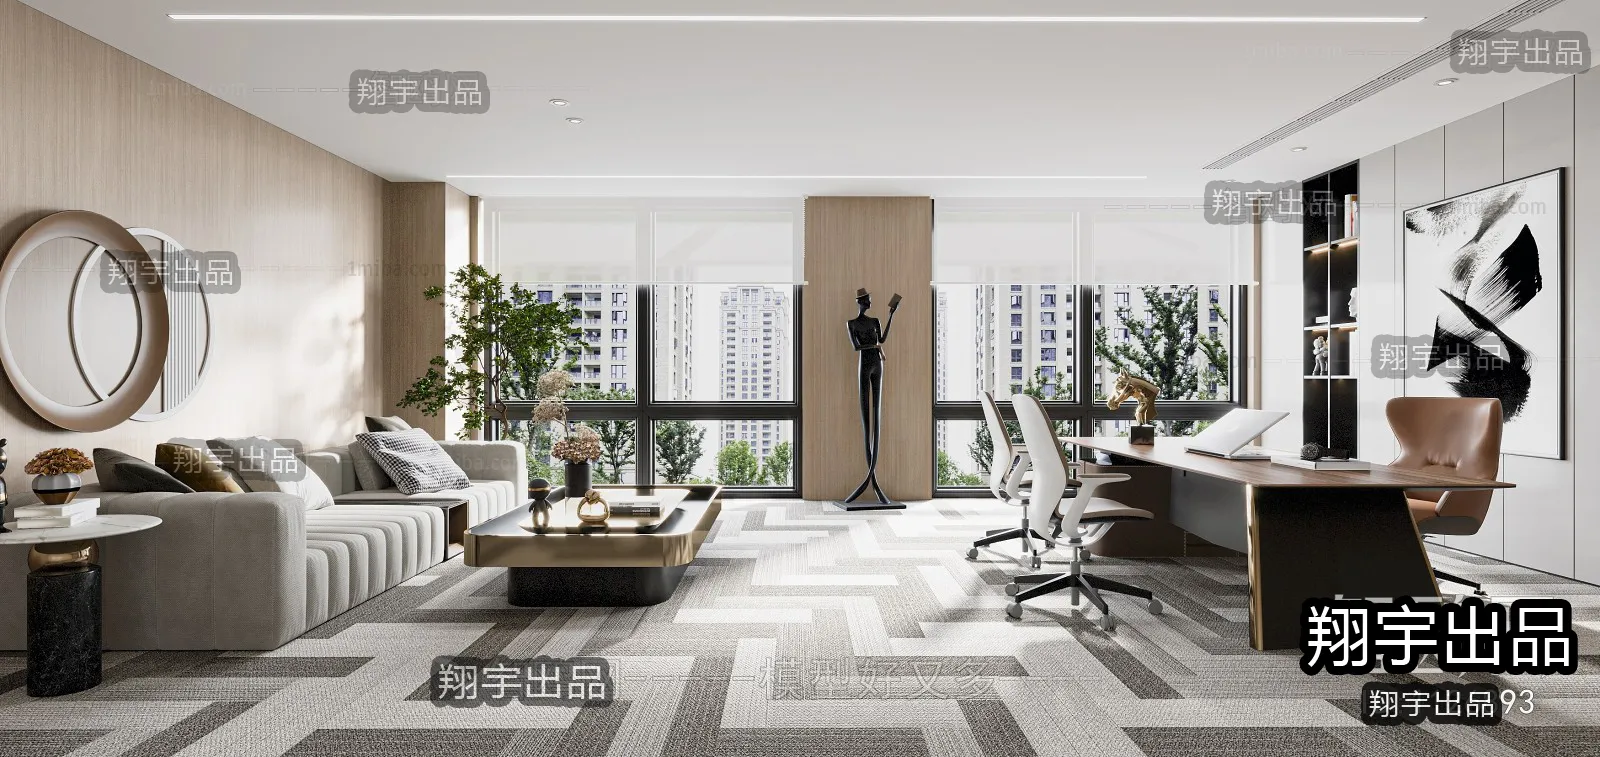 3D OFFICE INTERIOR (VRAY) – MANAGER ROOM 3D SCENES – 106